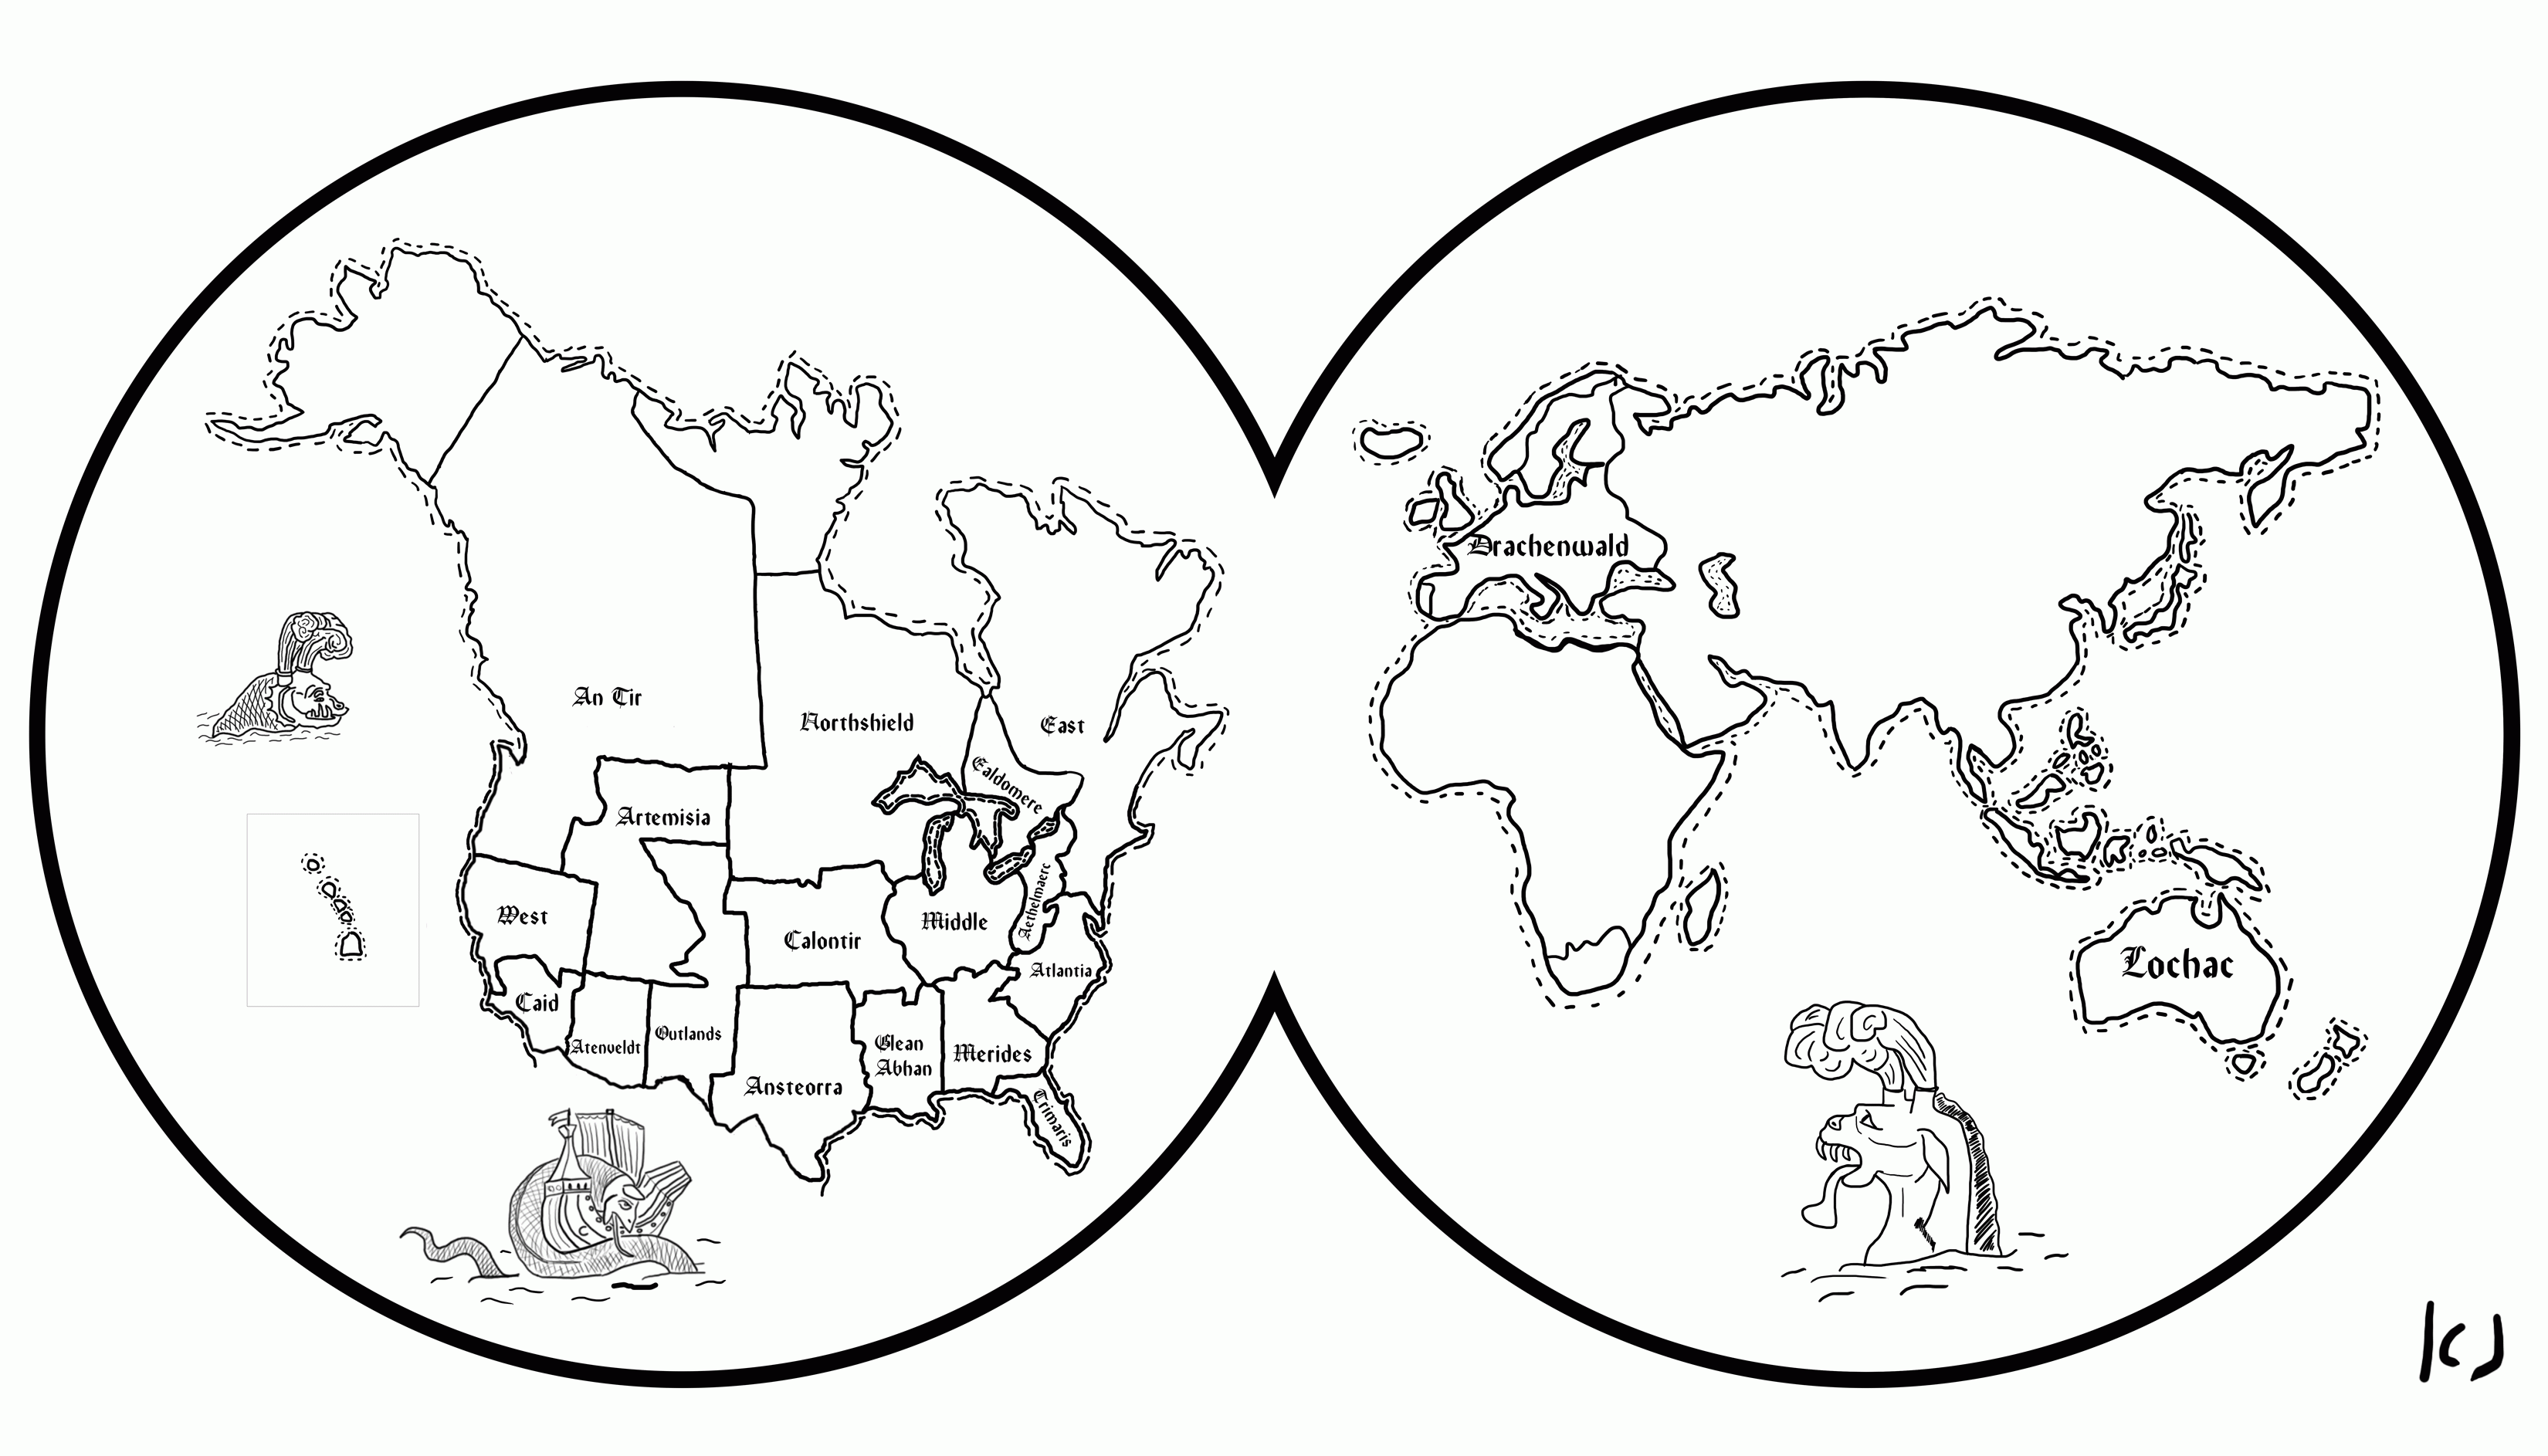 Free World Map | Coloring Page for Kids, Download Free World Map